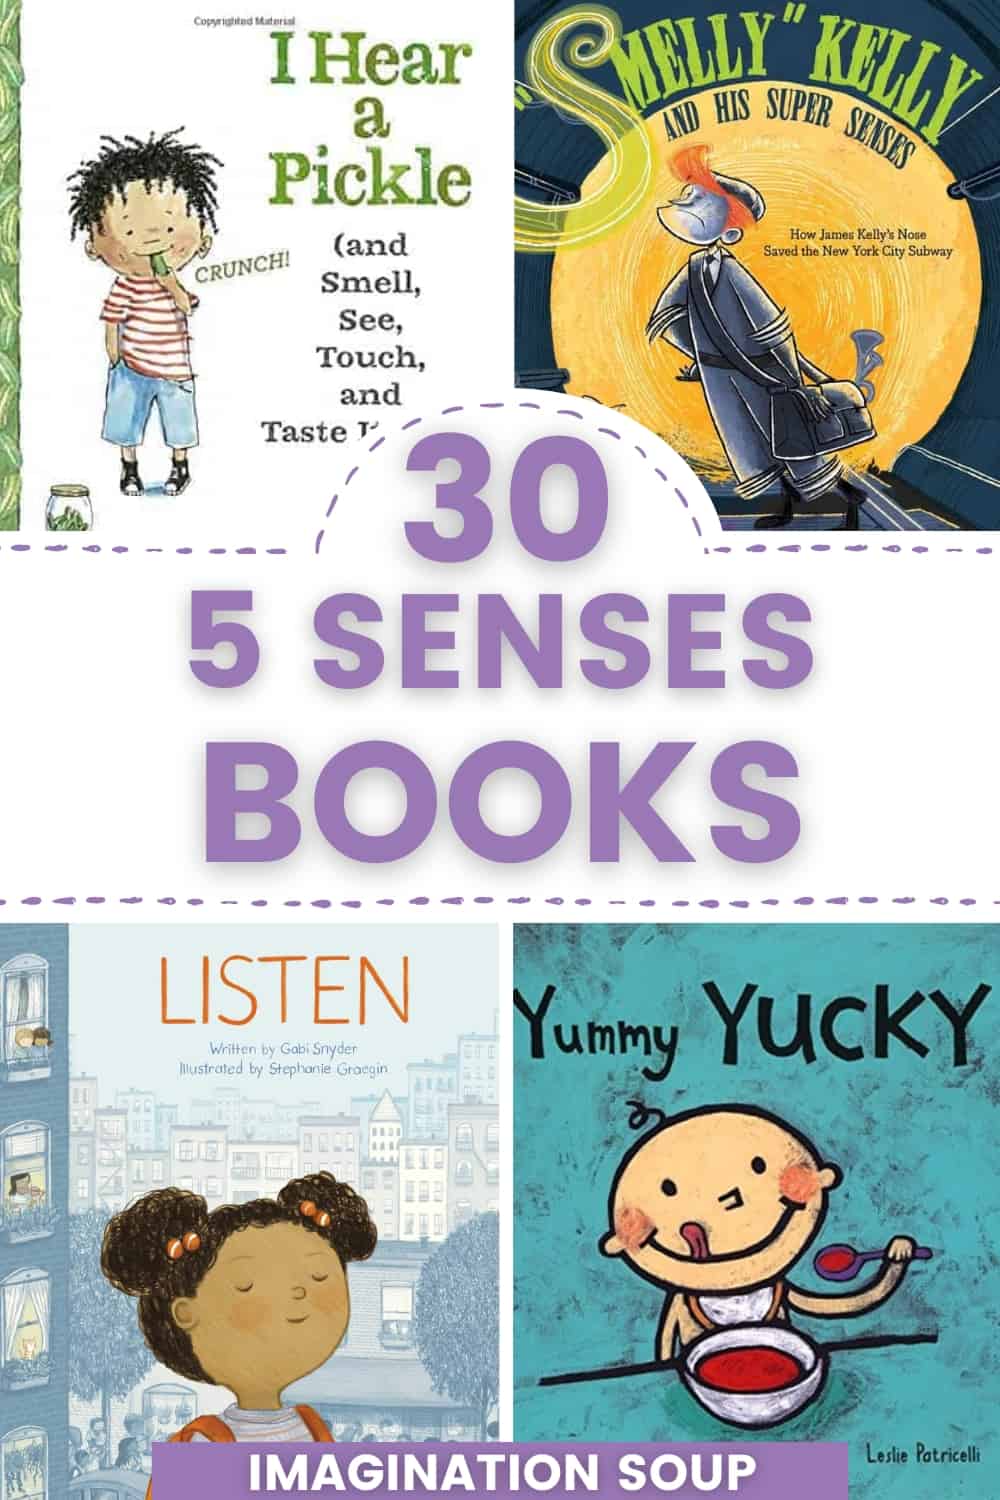 Make learning about the 5 senses fun for your kids with good books and fun sensory activities like the ideas below.


Do your preschoolers know what the five senses are yet? If not, it's always a good time to introduce, practice, and reinforce each of the 5 senses of smell, sight, taste, touch, and hearing-- and to tie those to the appropriate body parts of the nose, eyes, mouth, fingers, and ears. (These are also called the sensory organs.)